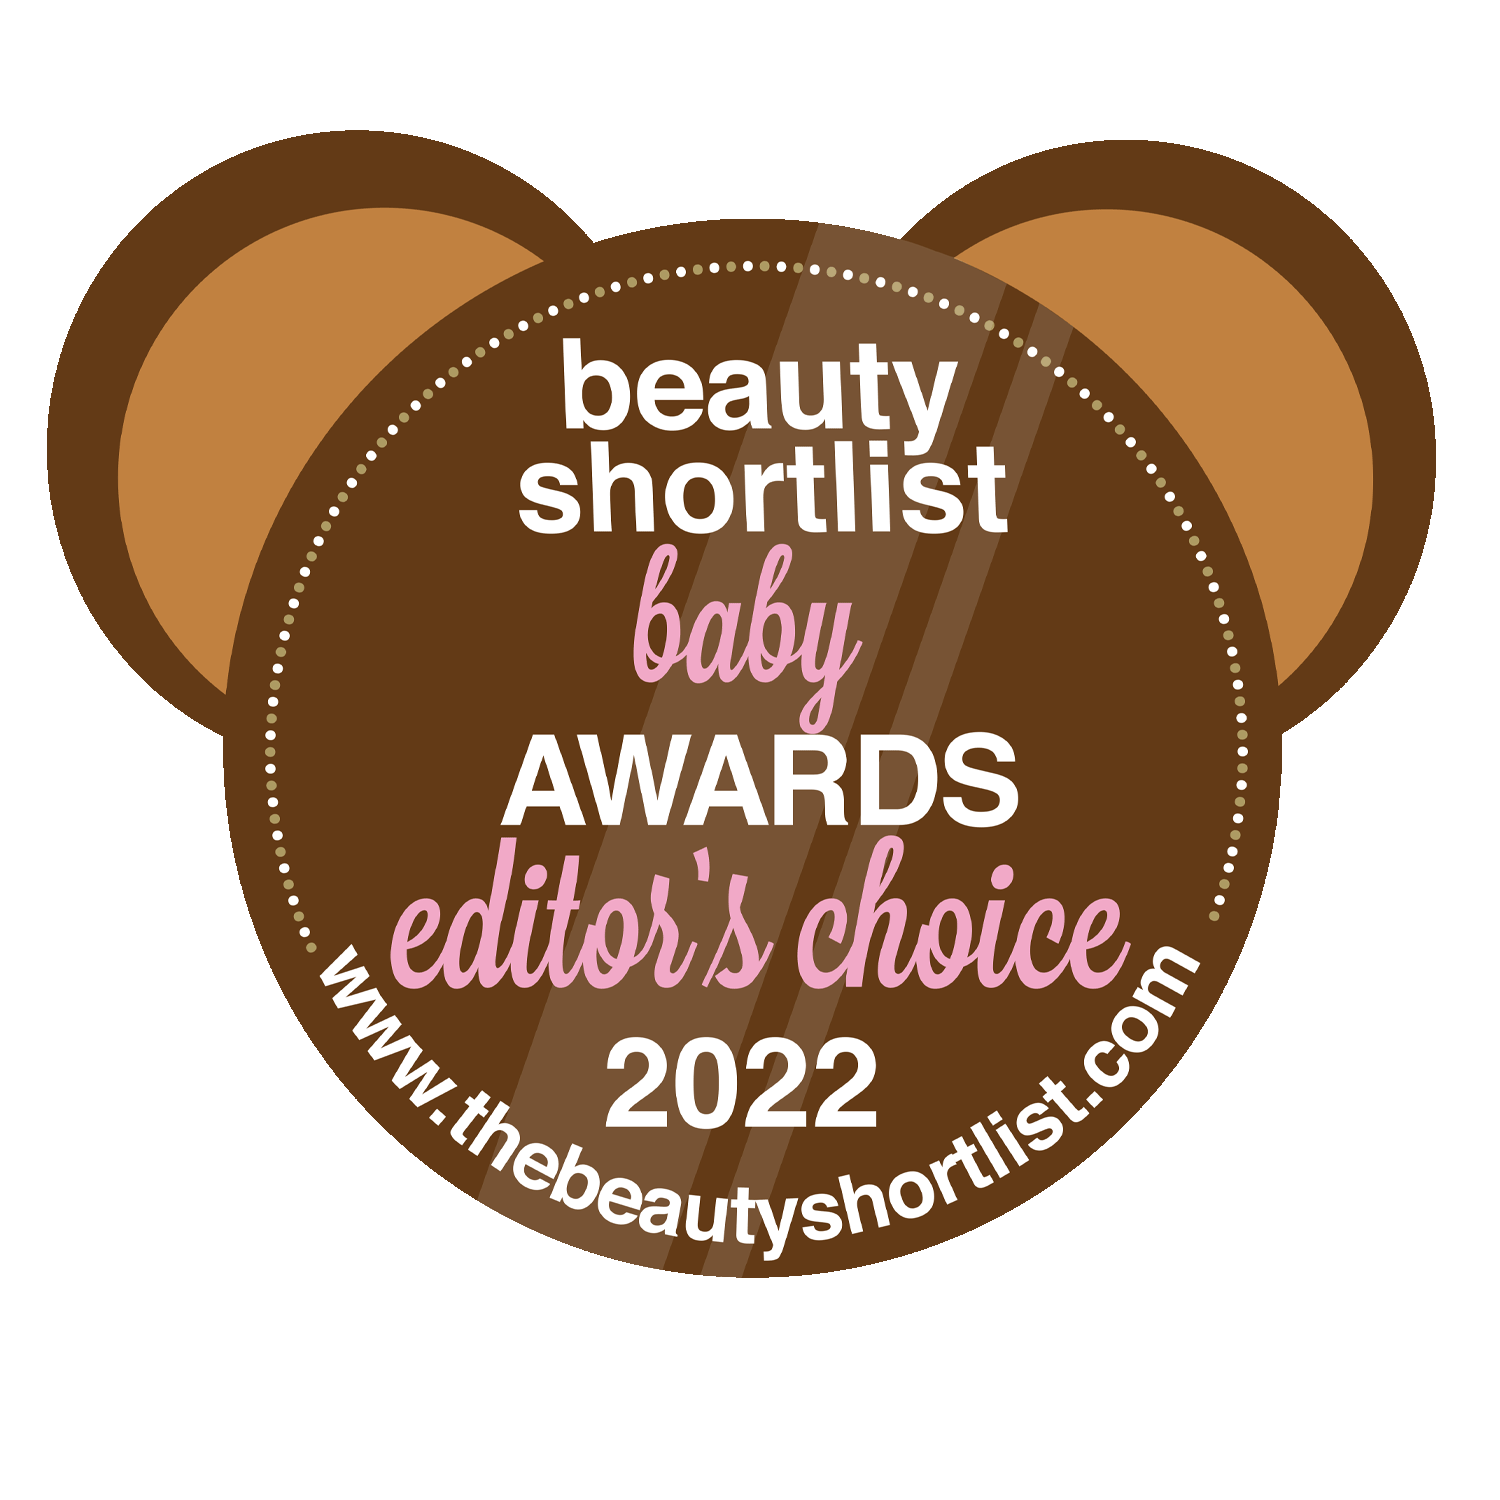 Beauty Shortlist Baby Awards Editors Choice 2022 - The Universal Soul Company.png